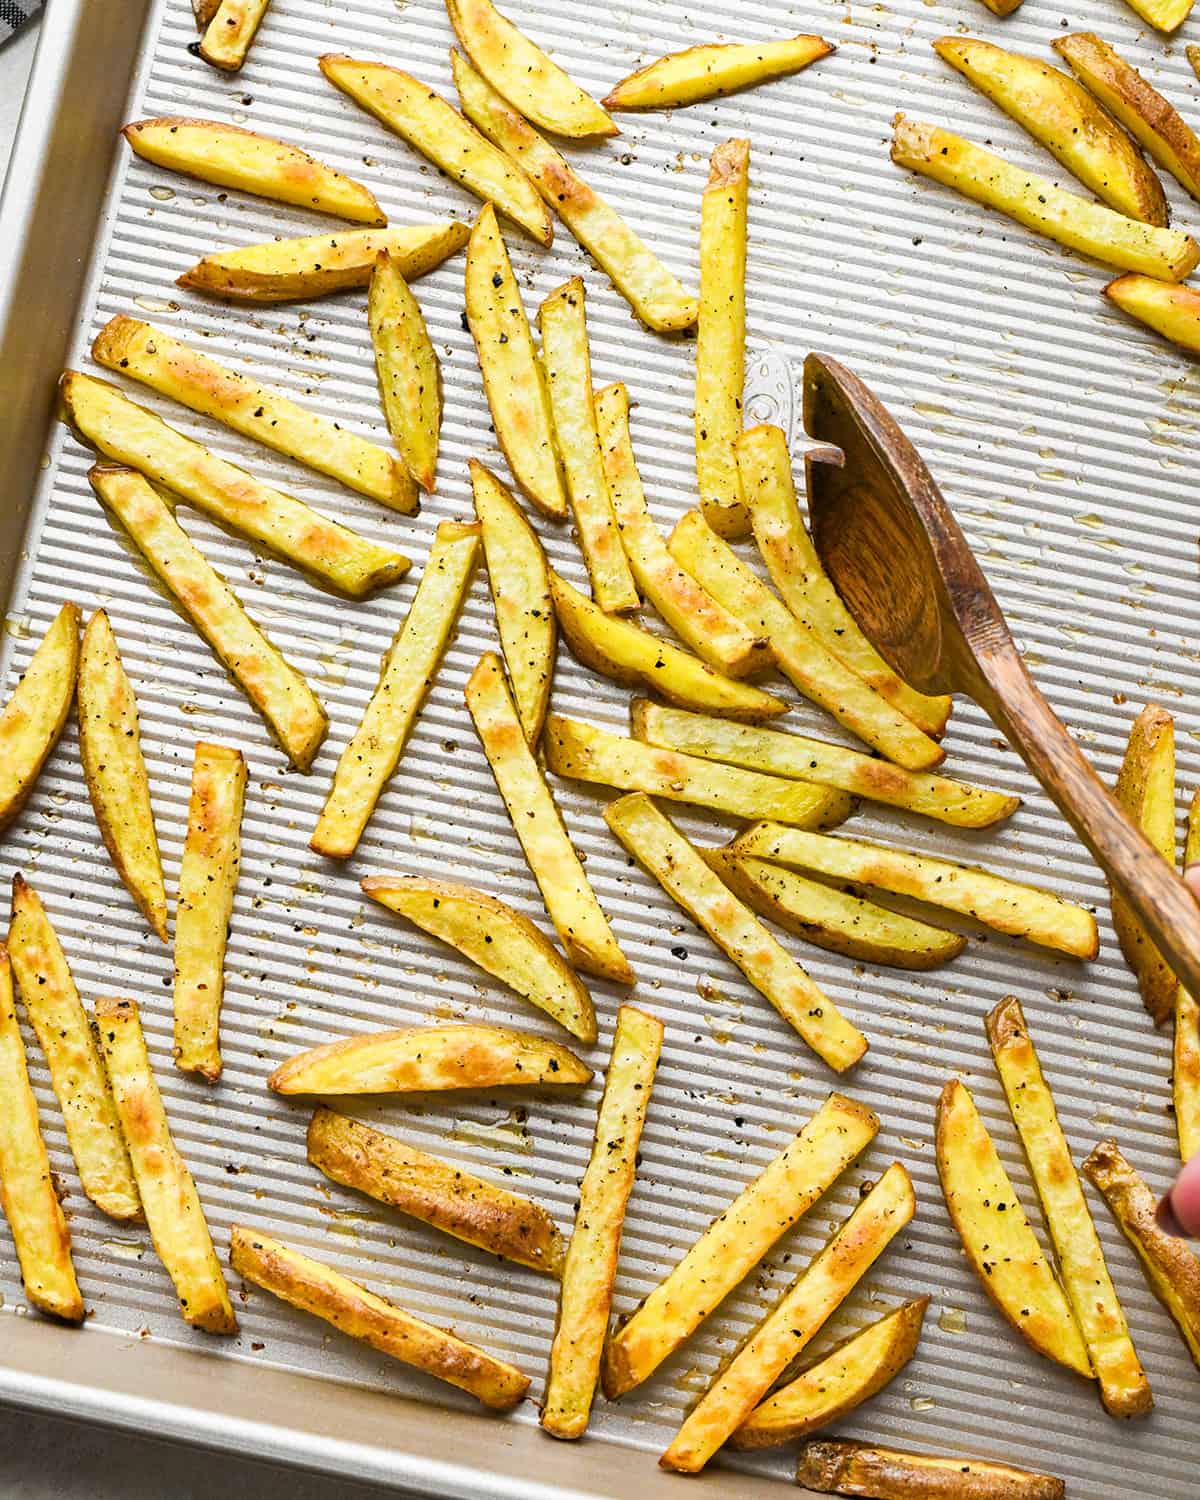 oven baked french fries on a baking sheet after baking